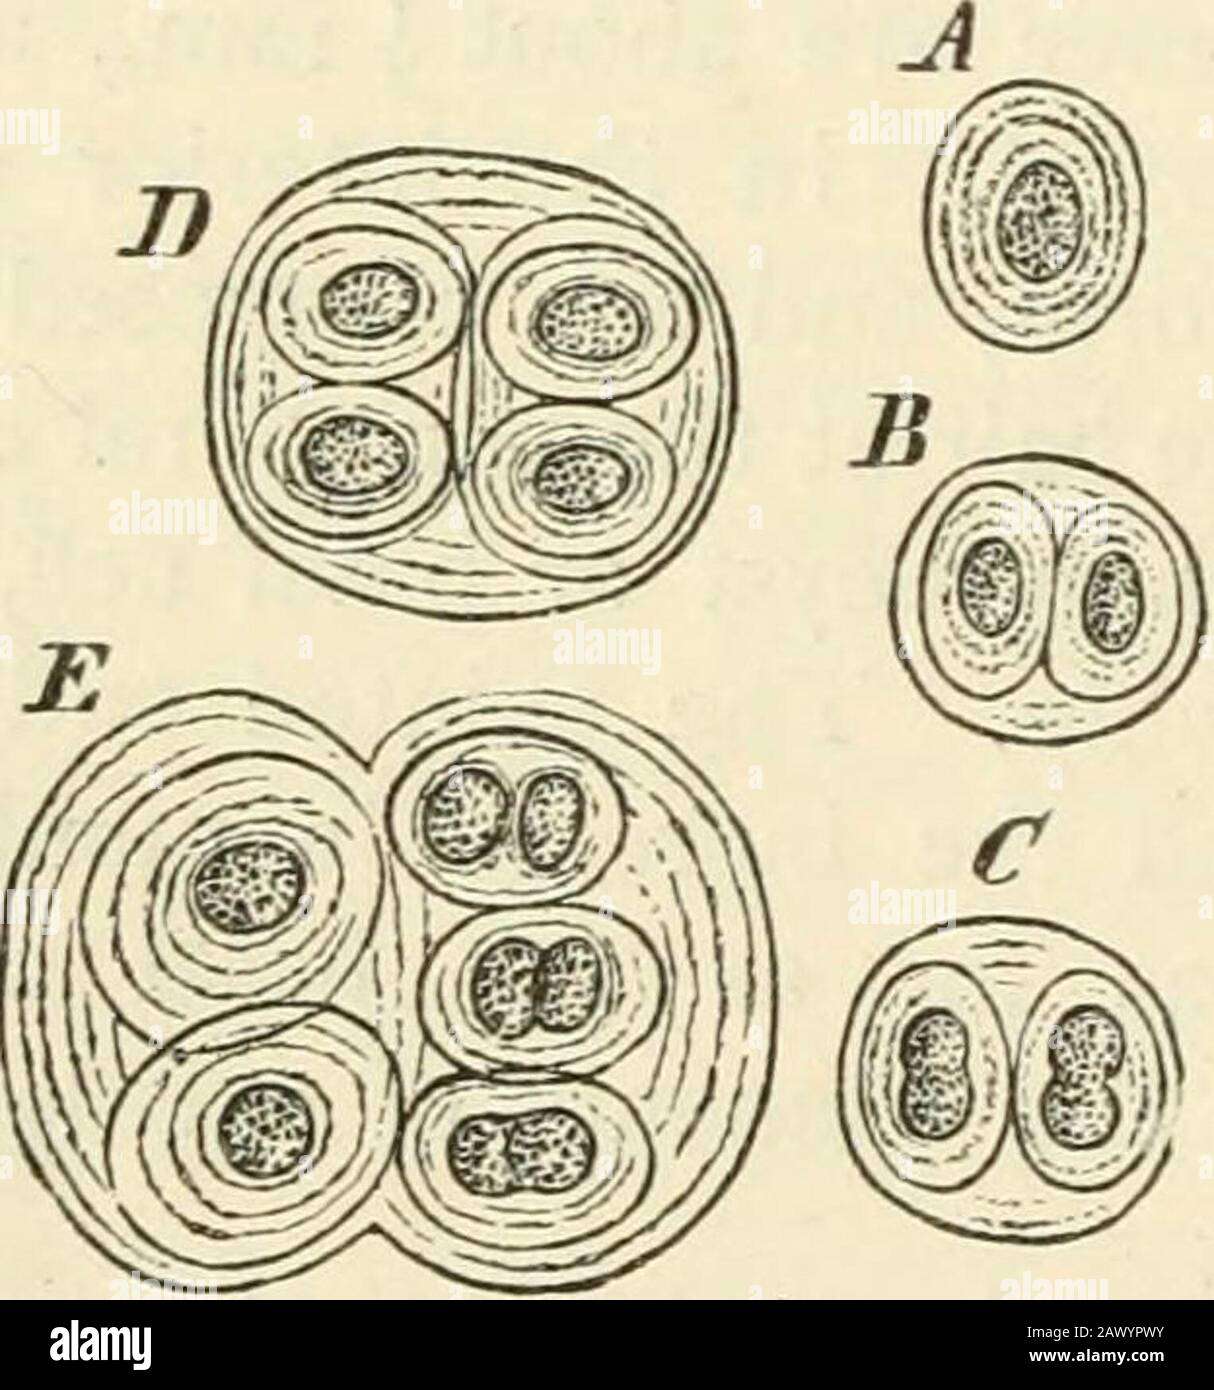 Text-book of botany, morphological and physiological . ss of layers of the softened gelatinous walls ofthe mother-cell surround the daughter-cells which proceedfrom it with their gelatinous envelopes which are also stra-tified, and thus form systems of layers enclosed in oneanother. The relations of growth now pointed out in thecase of Nostocaceae and Chroococcacese are repeated, inall essential particulars, in some other groups of verysimple Algae, the cells of which contain pure chlorophyll.The peculiar bluish- or brownish-green colour which theNostocaceae share with the Chroococcaceae, is c Stock Photo